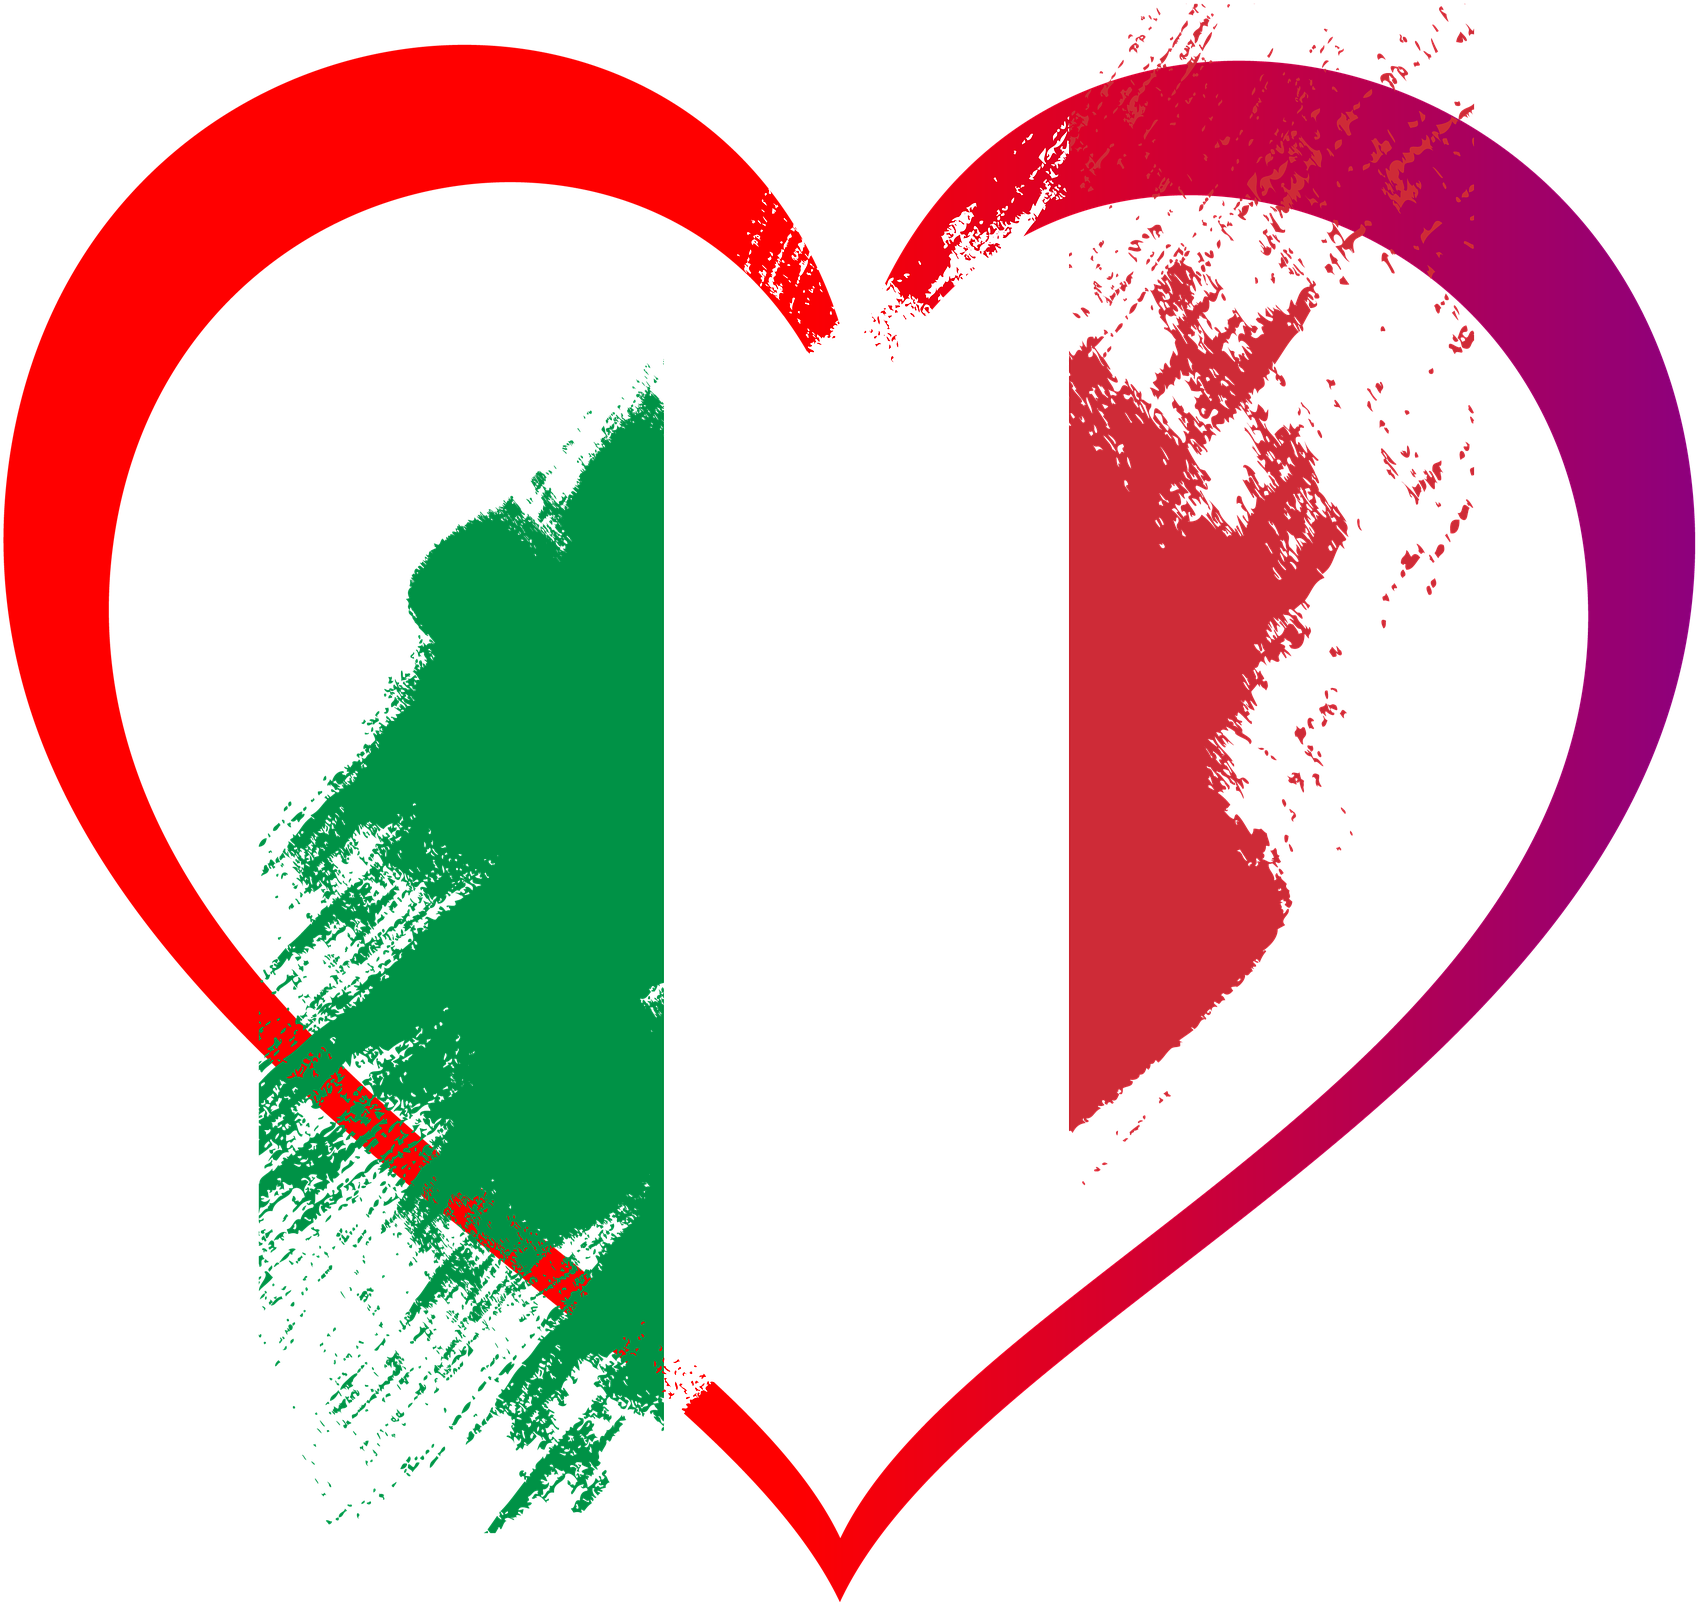 Italy PNG Image